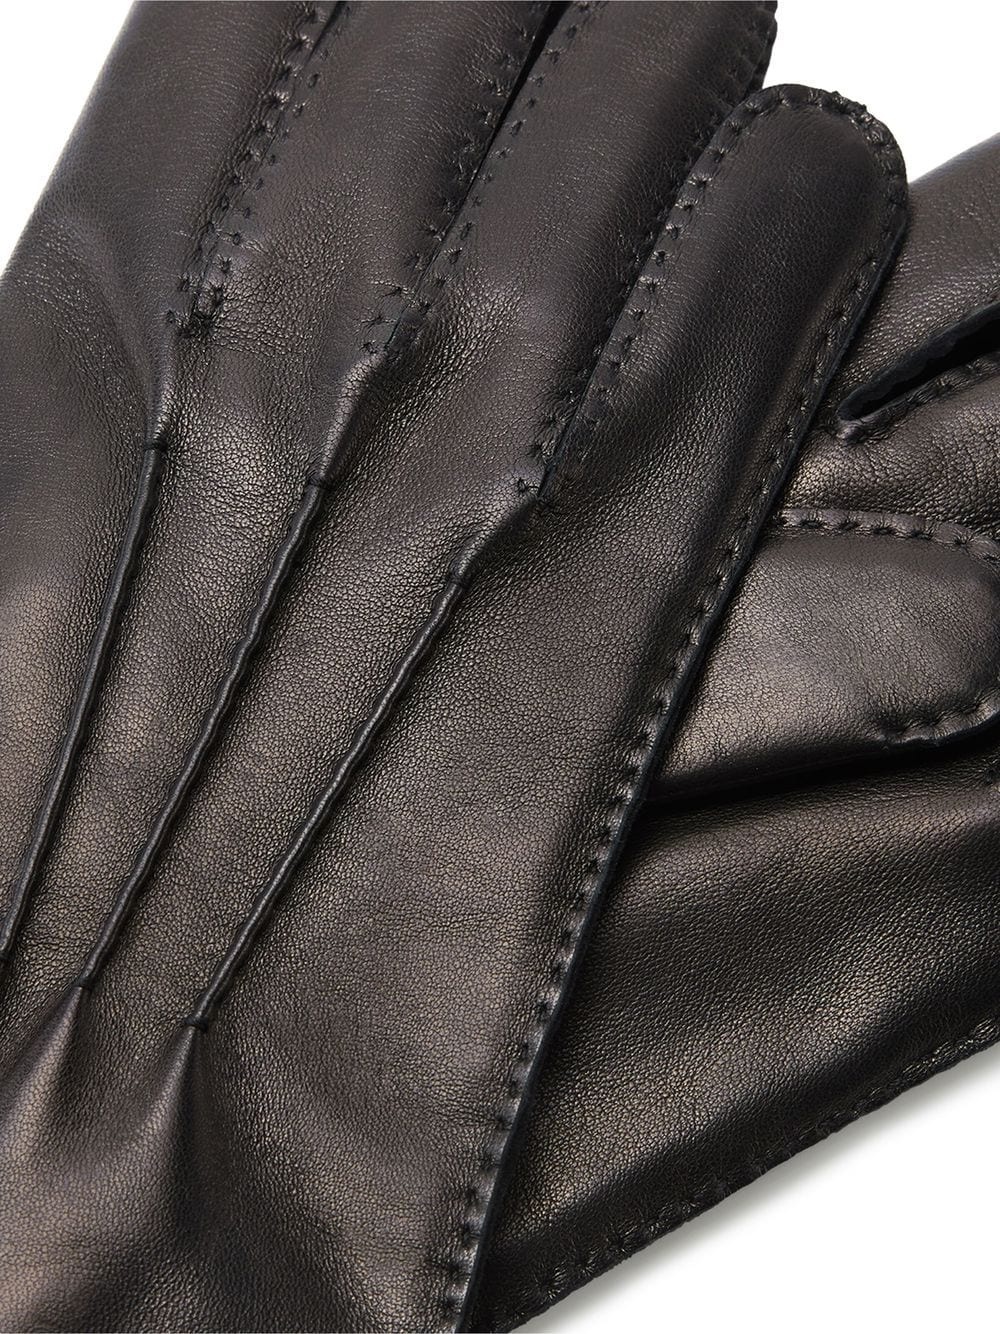 cashmere-lined leather gloves - 2